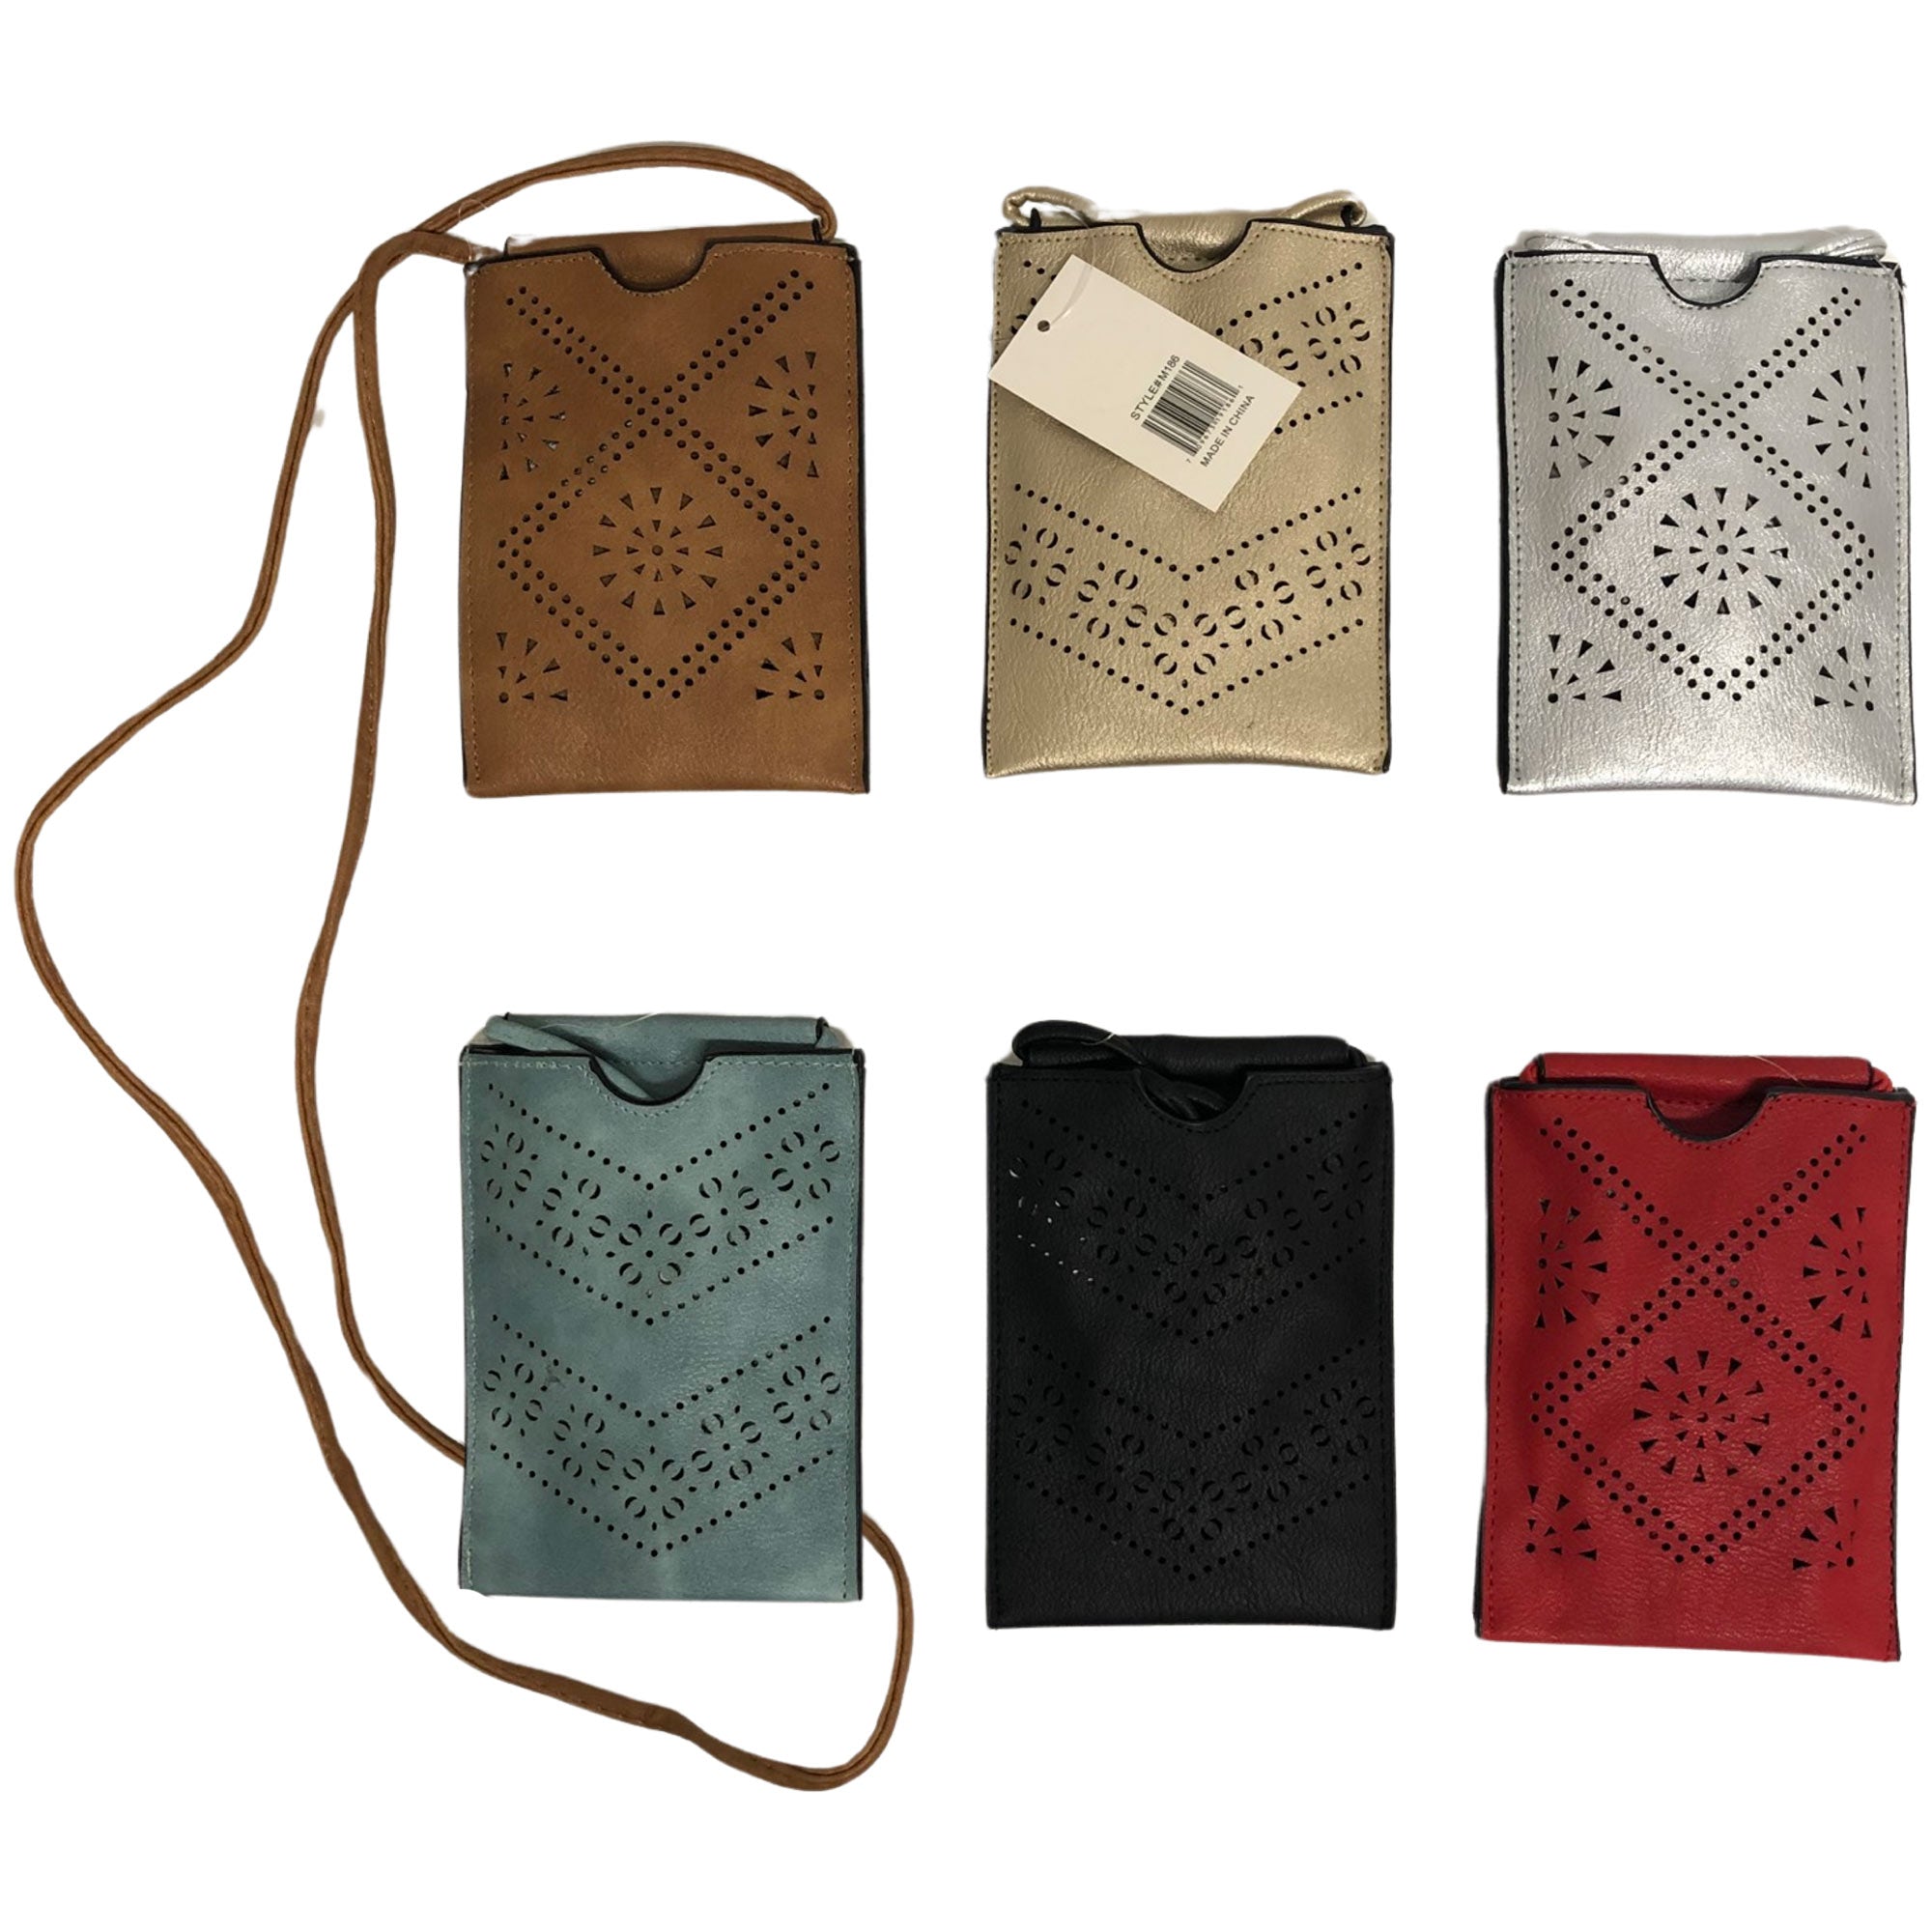 CLEARANCE CROSSBODY BAG POUCH (CASE OF 48 - $1.75 / PIECE)  Wholesale Crossbody Bag in Assorted Colors SKU: M186-LASER-48